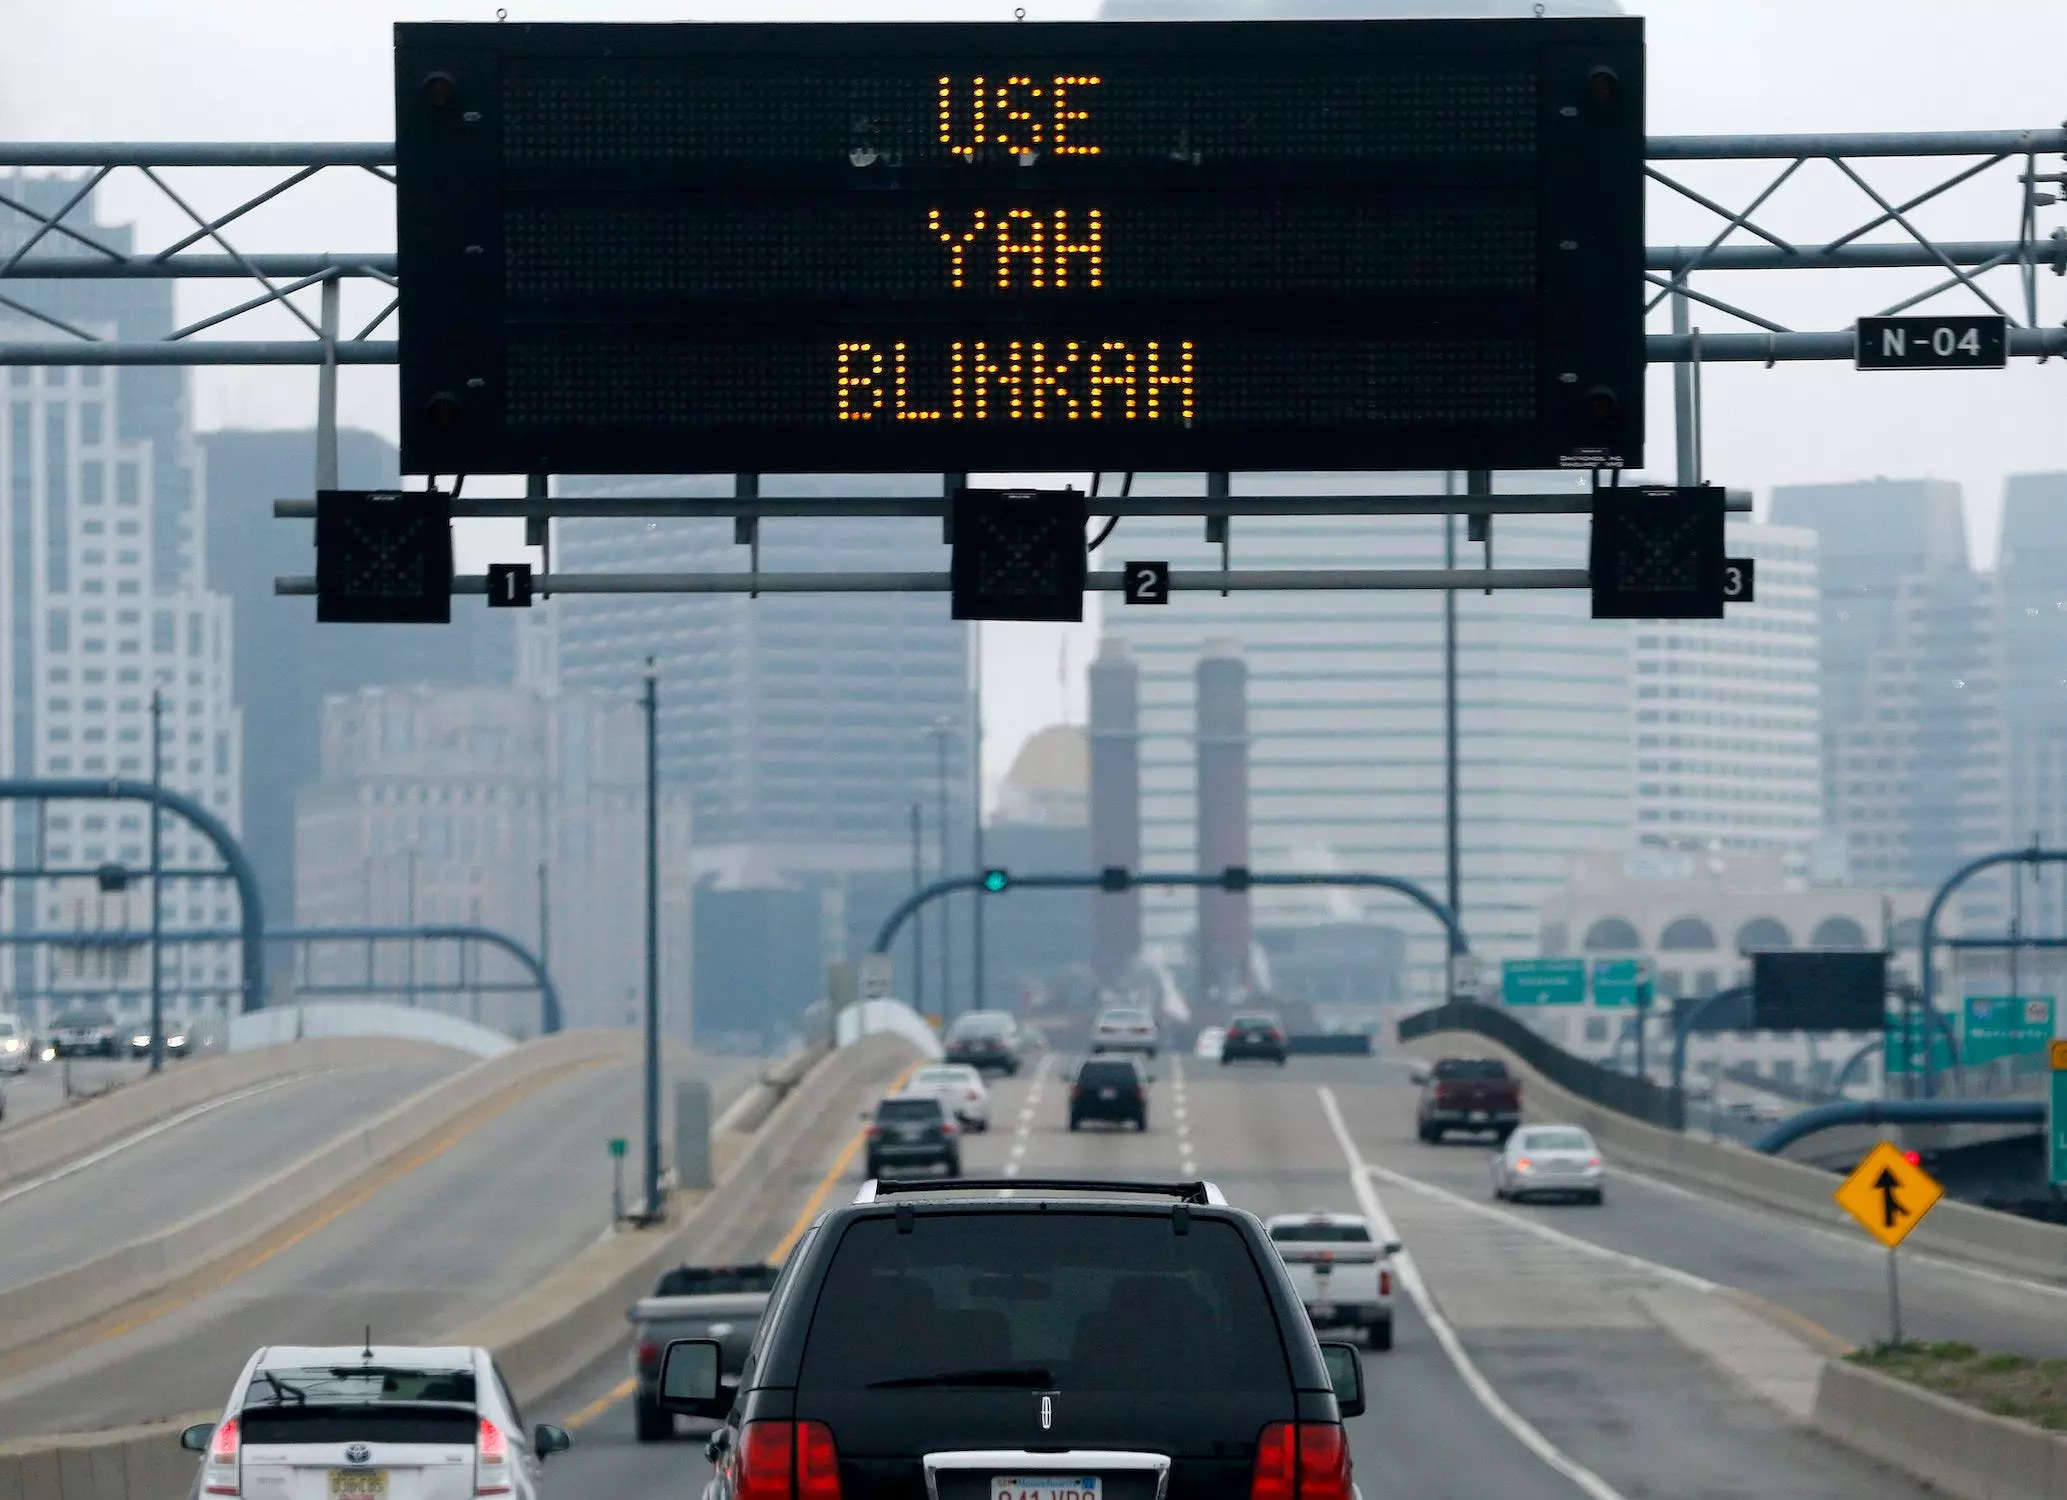 large black electronic sign reads "use yah blinkah" over a highway with cars